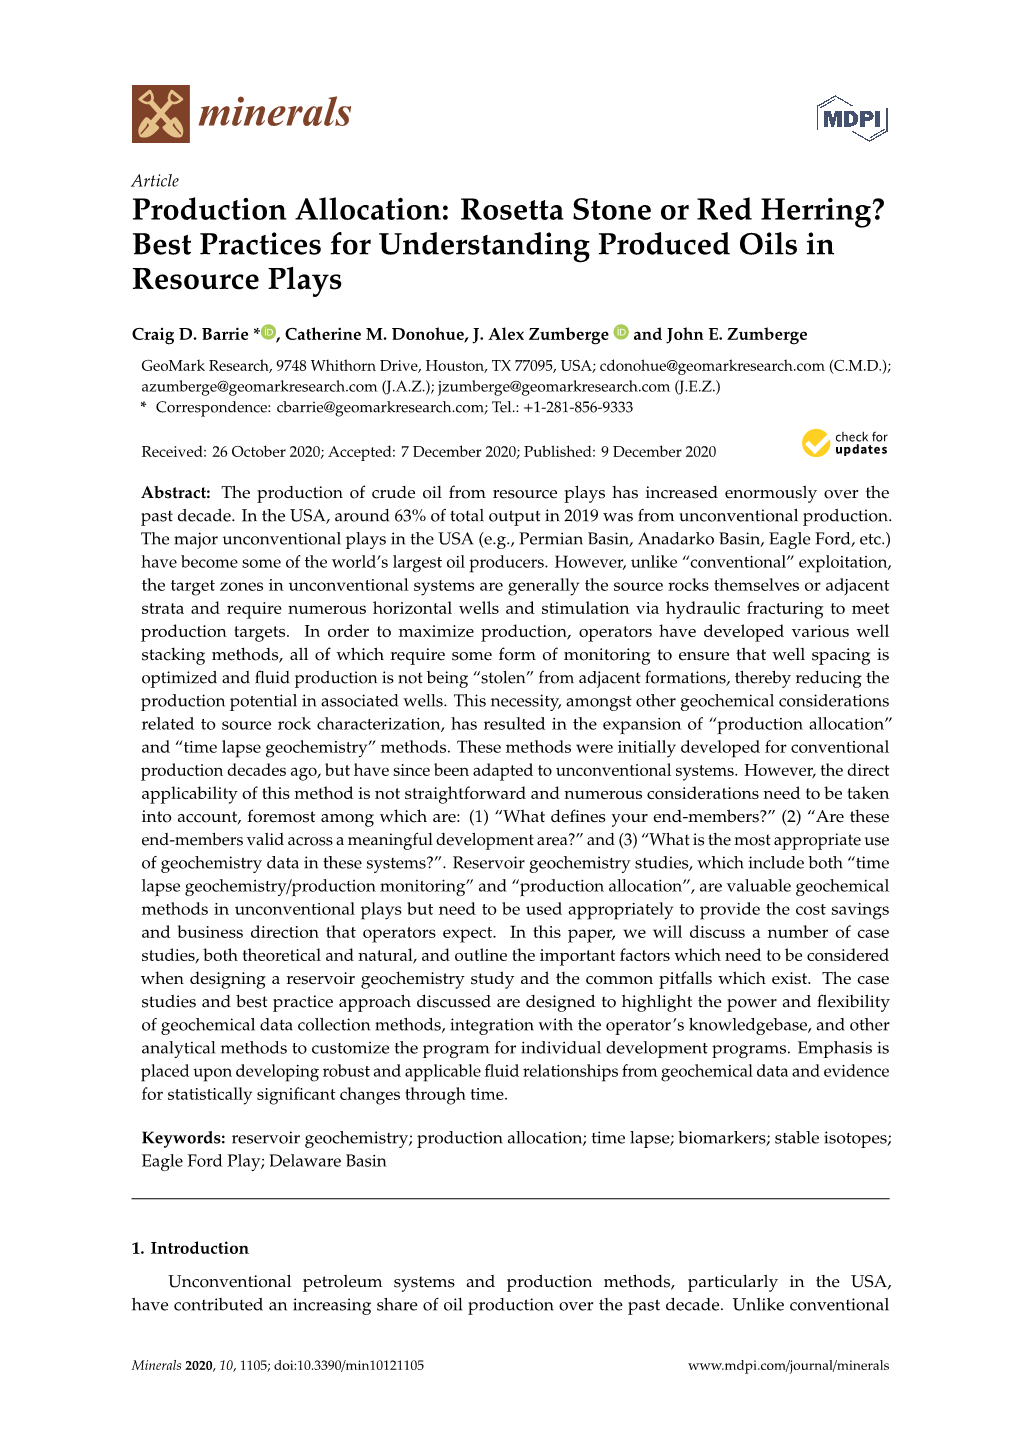 Production Allocation: Rosetta Stone Or Red Herring? Best Practices for Understanding Produced Oils in Resource Plays